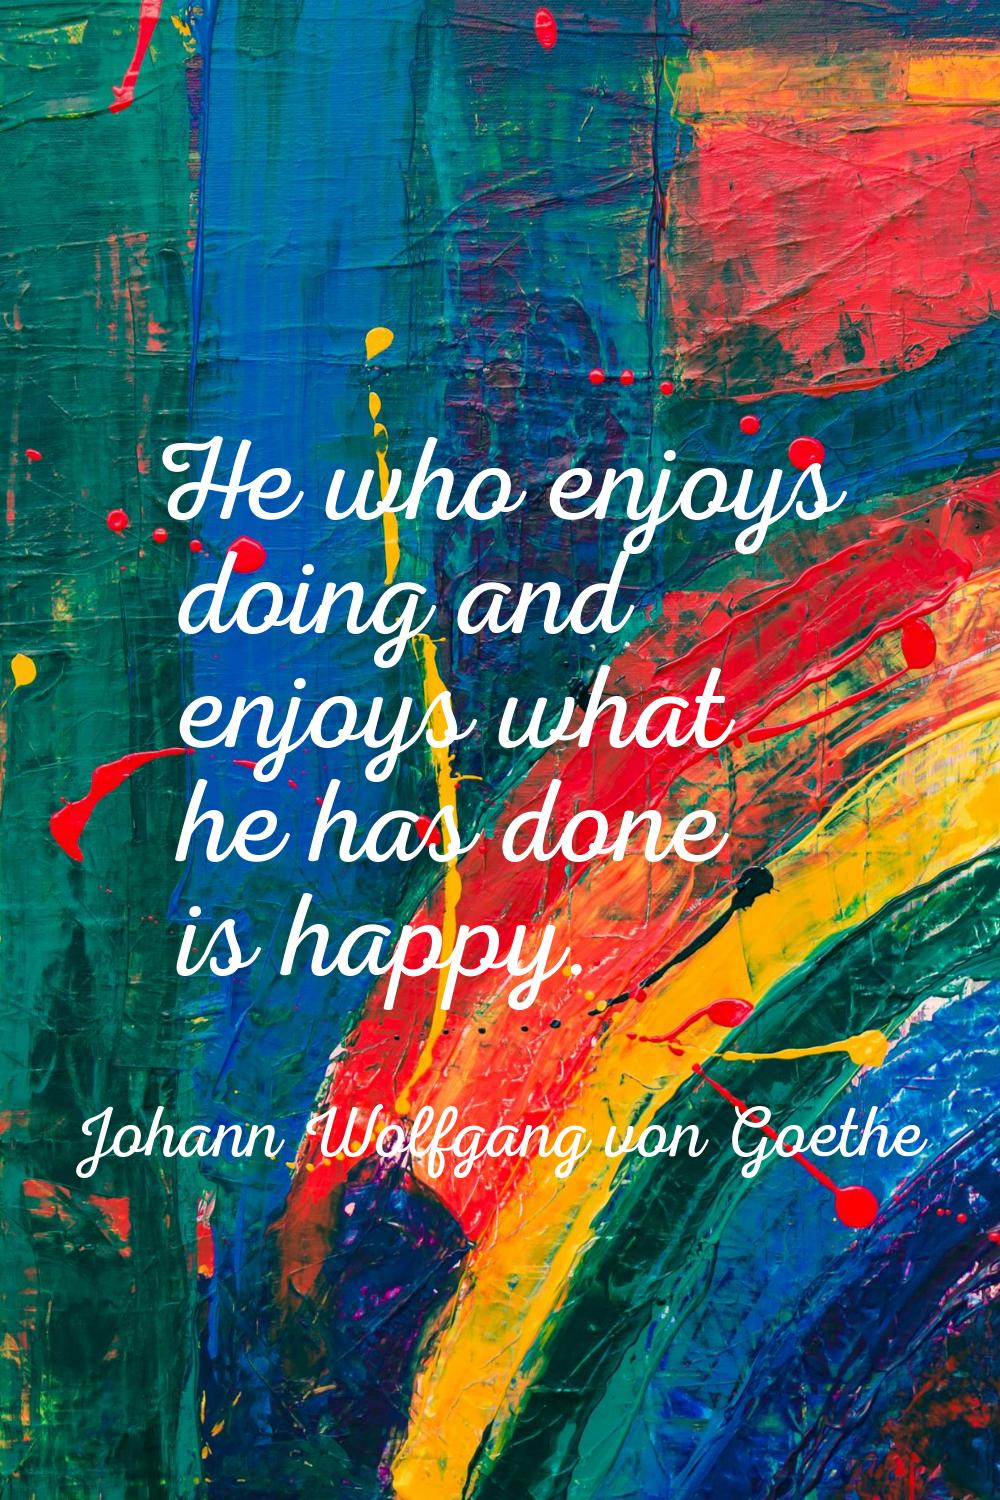 He who enjoys doing and enjoys what he has done is happy.